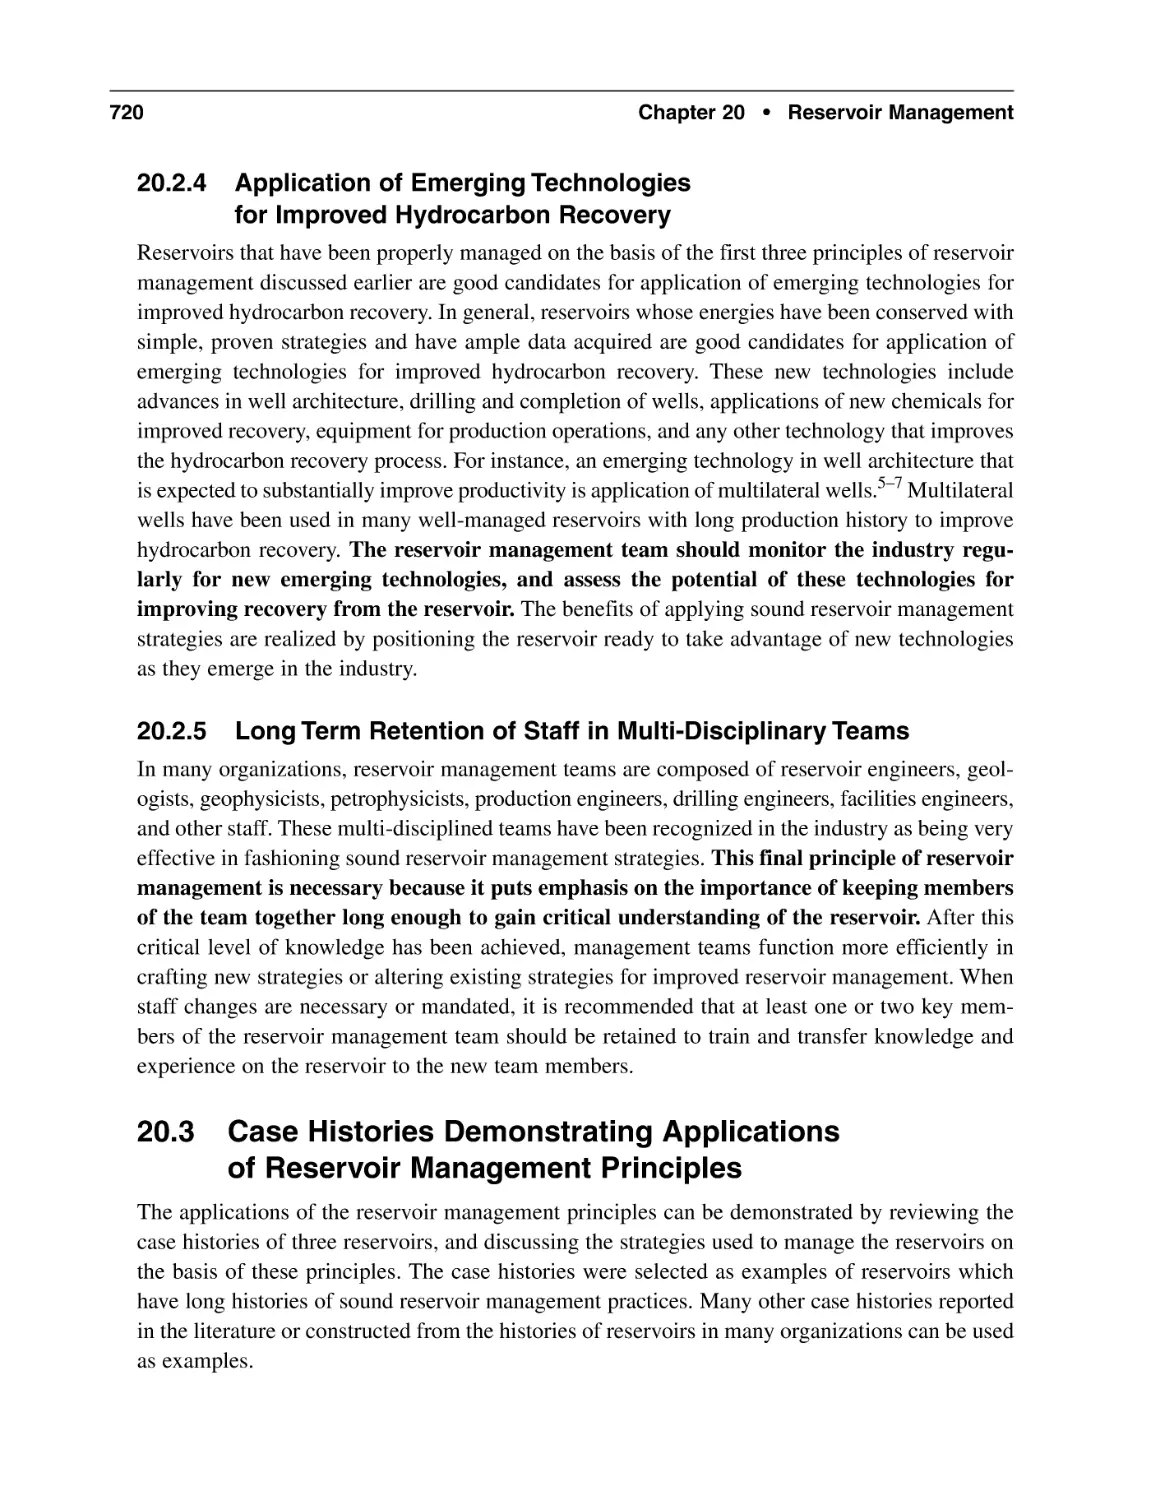 20.2.4 Application of Emerging Technologies for Improved Hydrocarbon Recovery
20.2.5 Long Term Retention of Staff in Multi-Disciplinary Teams
20.3 Case Histories Demonstrating Applications of Reservoir Management Principles